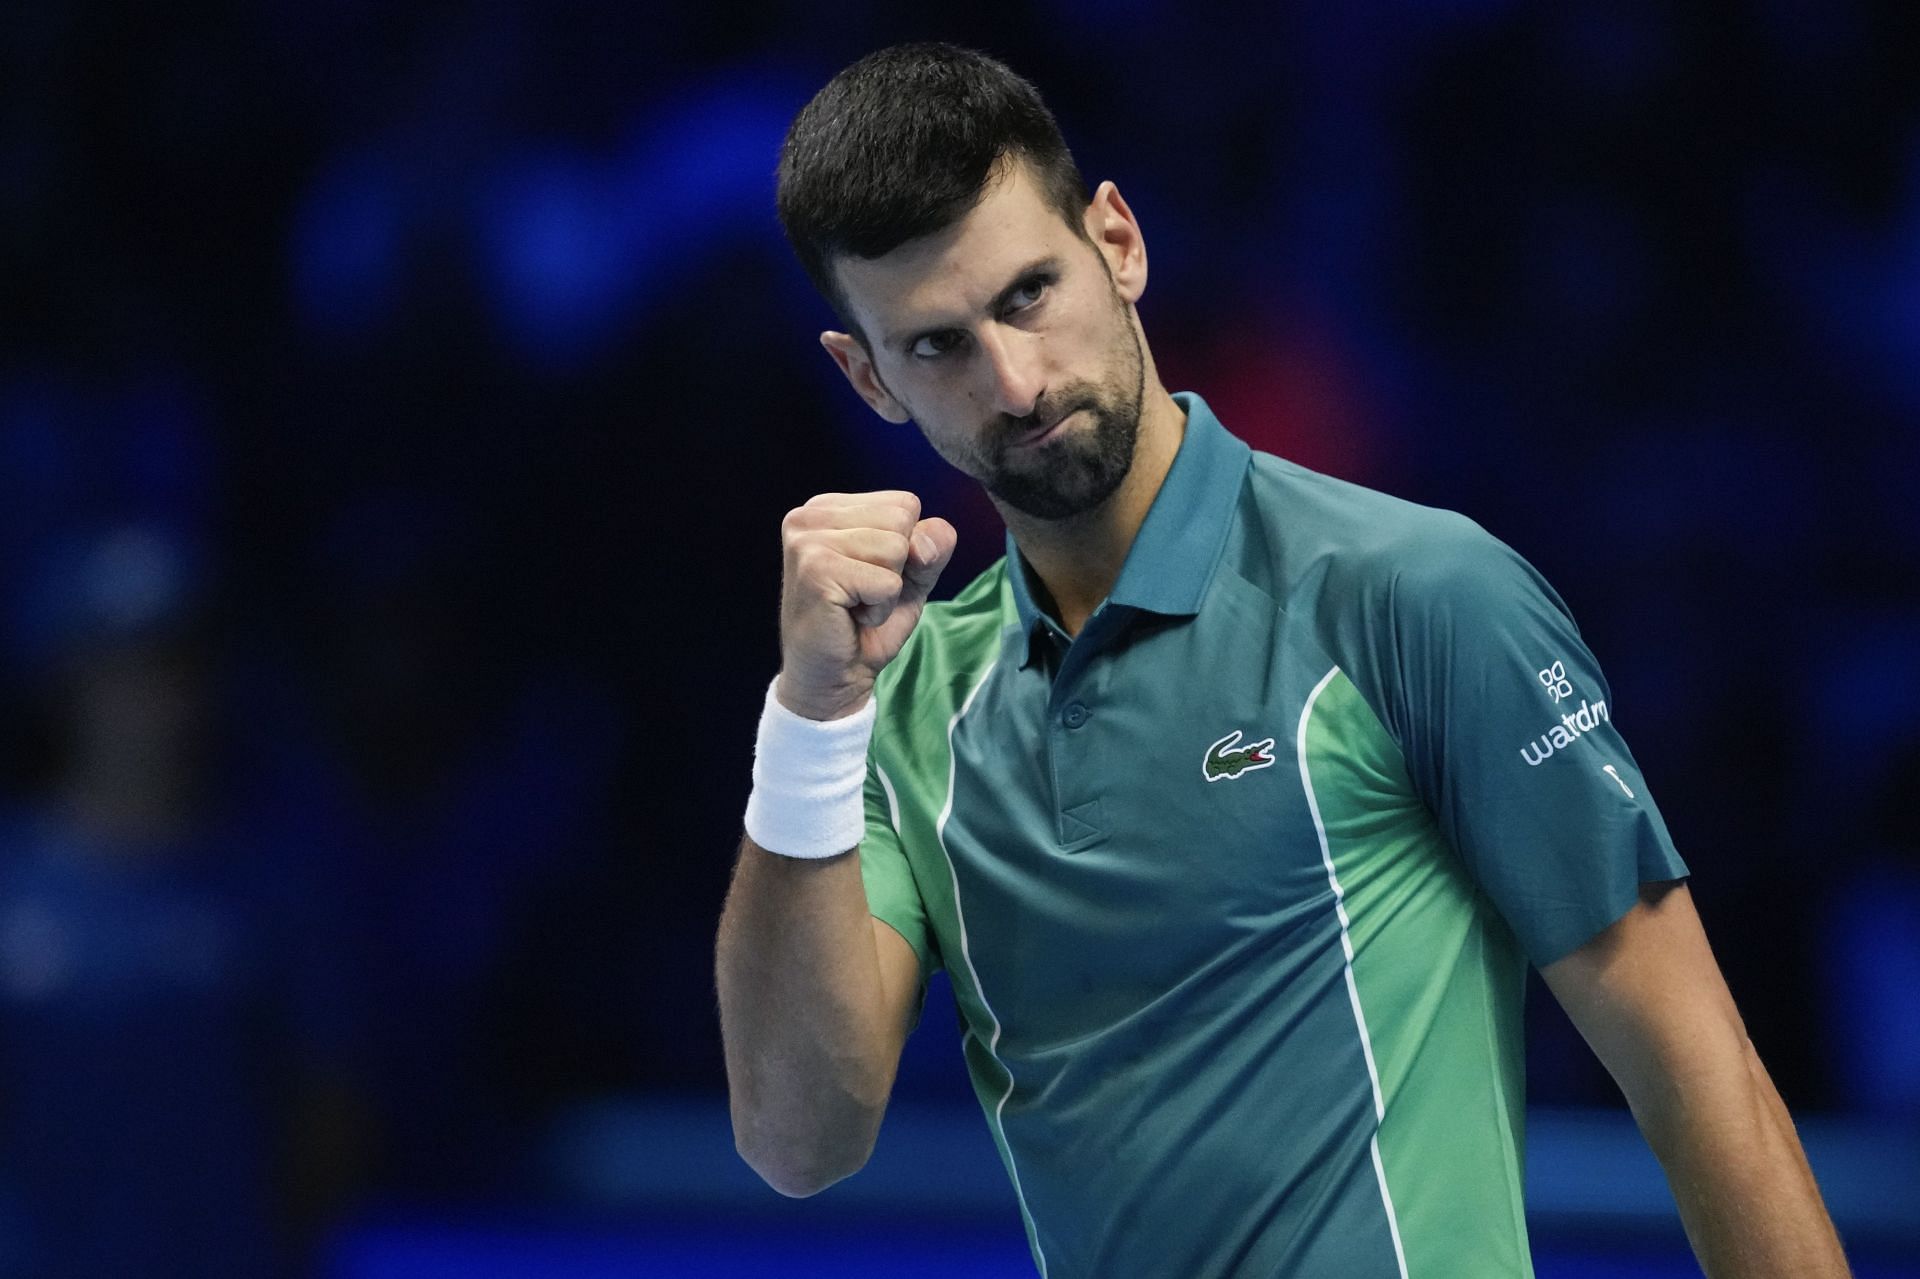 Ivanisevic revealed that Djokovic was pumped up ahead of the ATP Finals SF